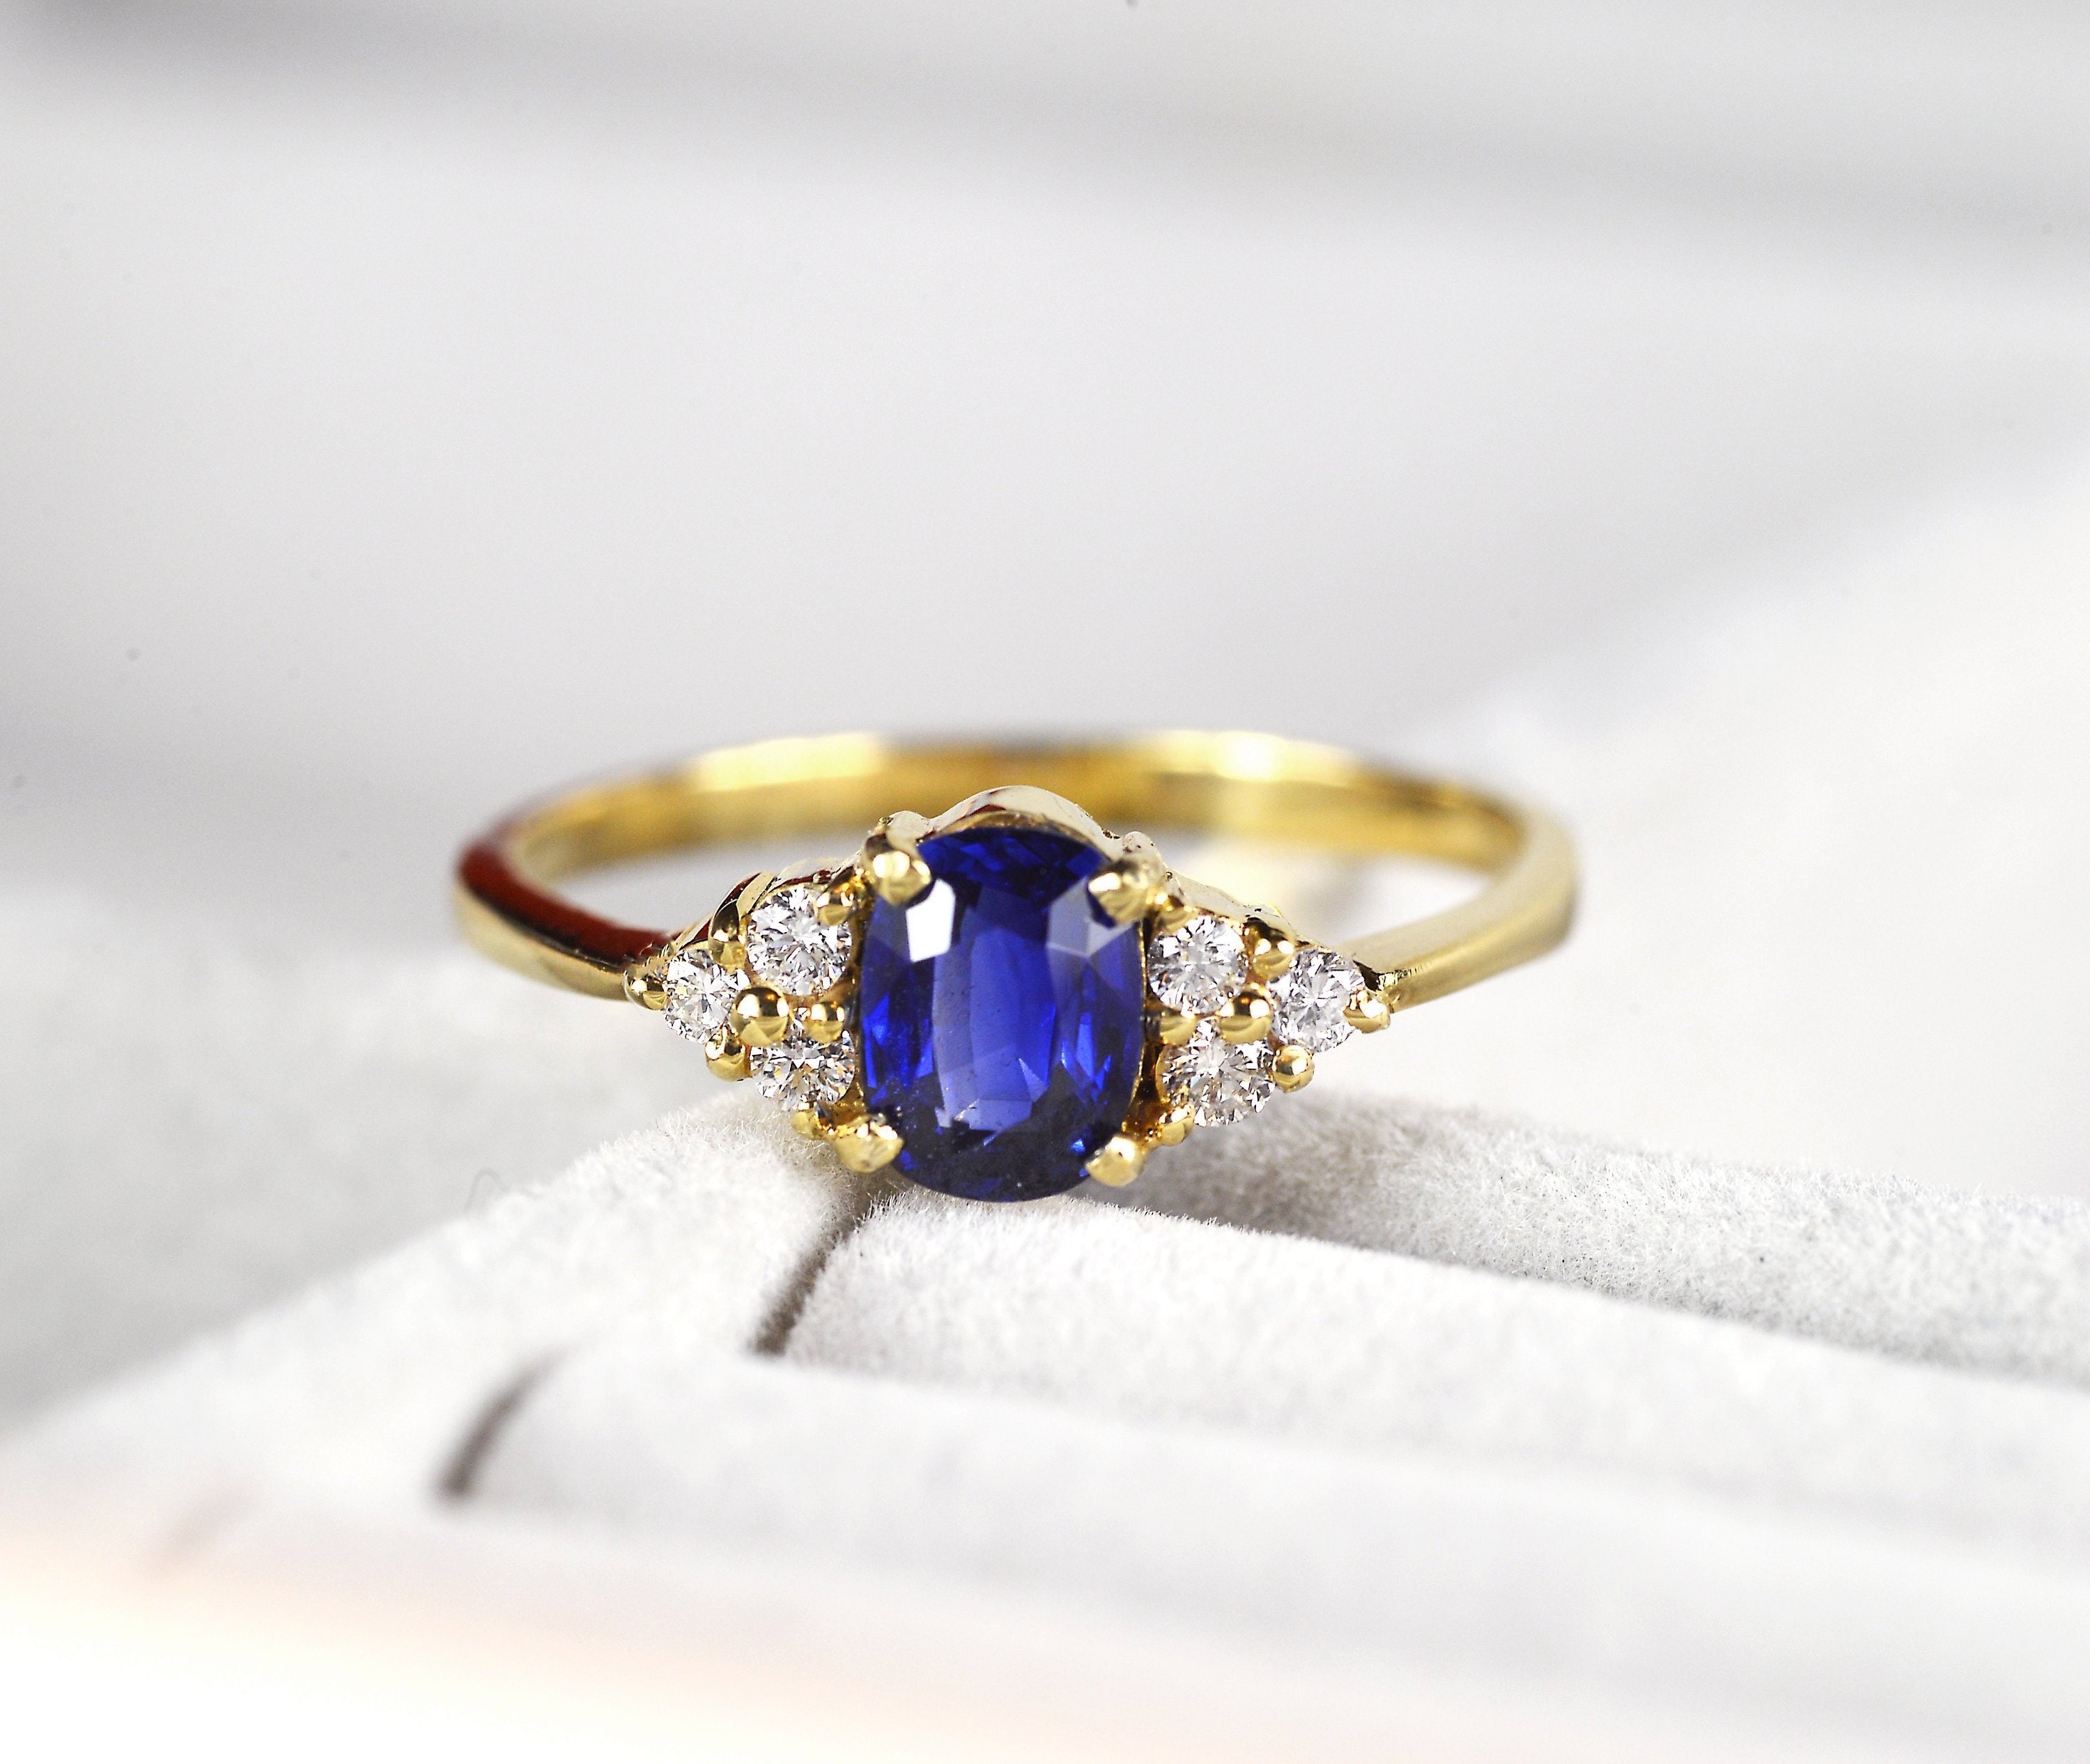 1Ct Blue Sapphire Engagement Ring, Ring, 1Ct Engagement Sapphire Wedding Ring